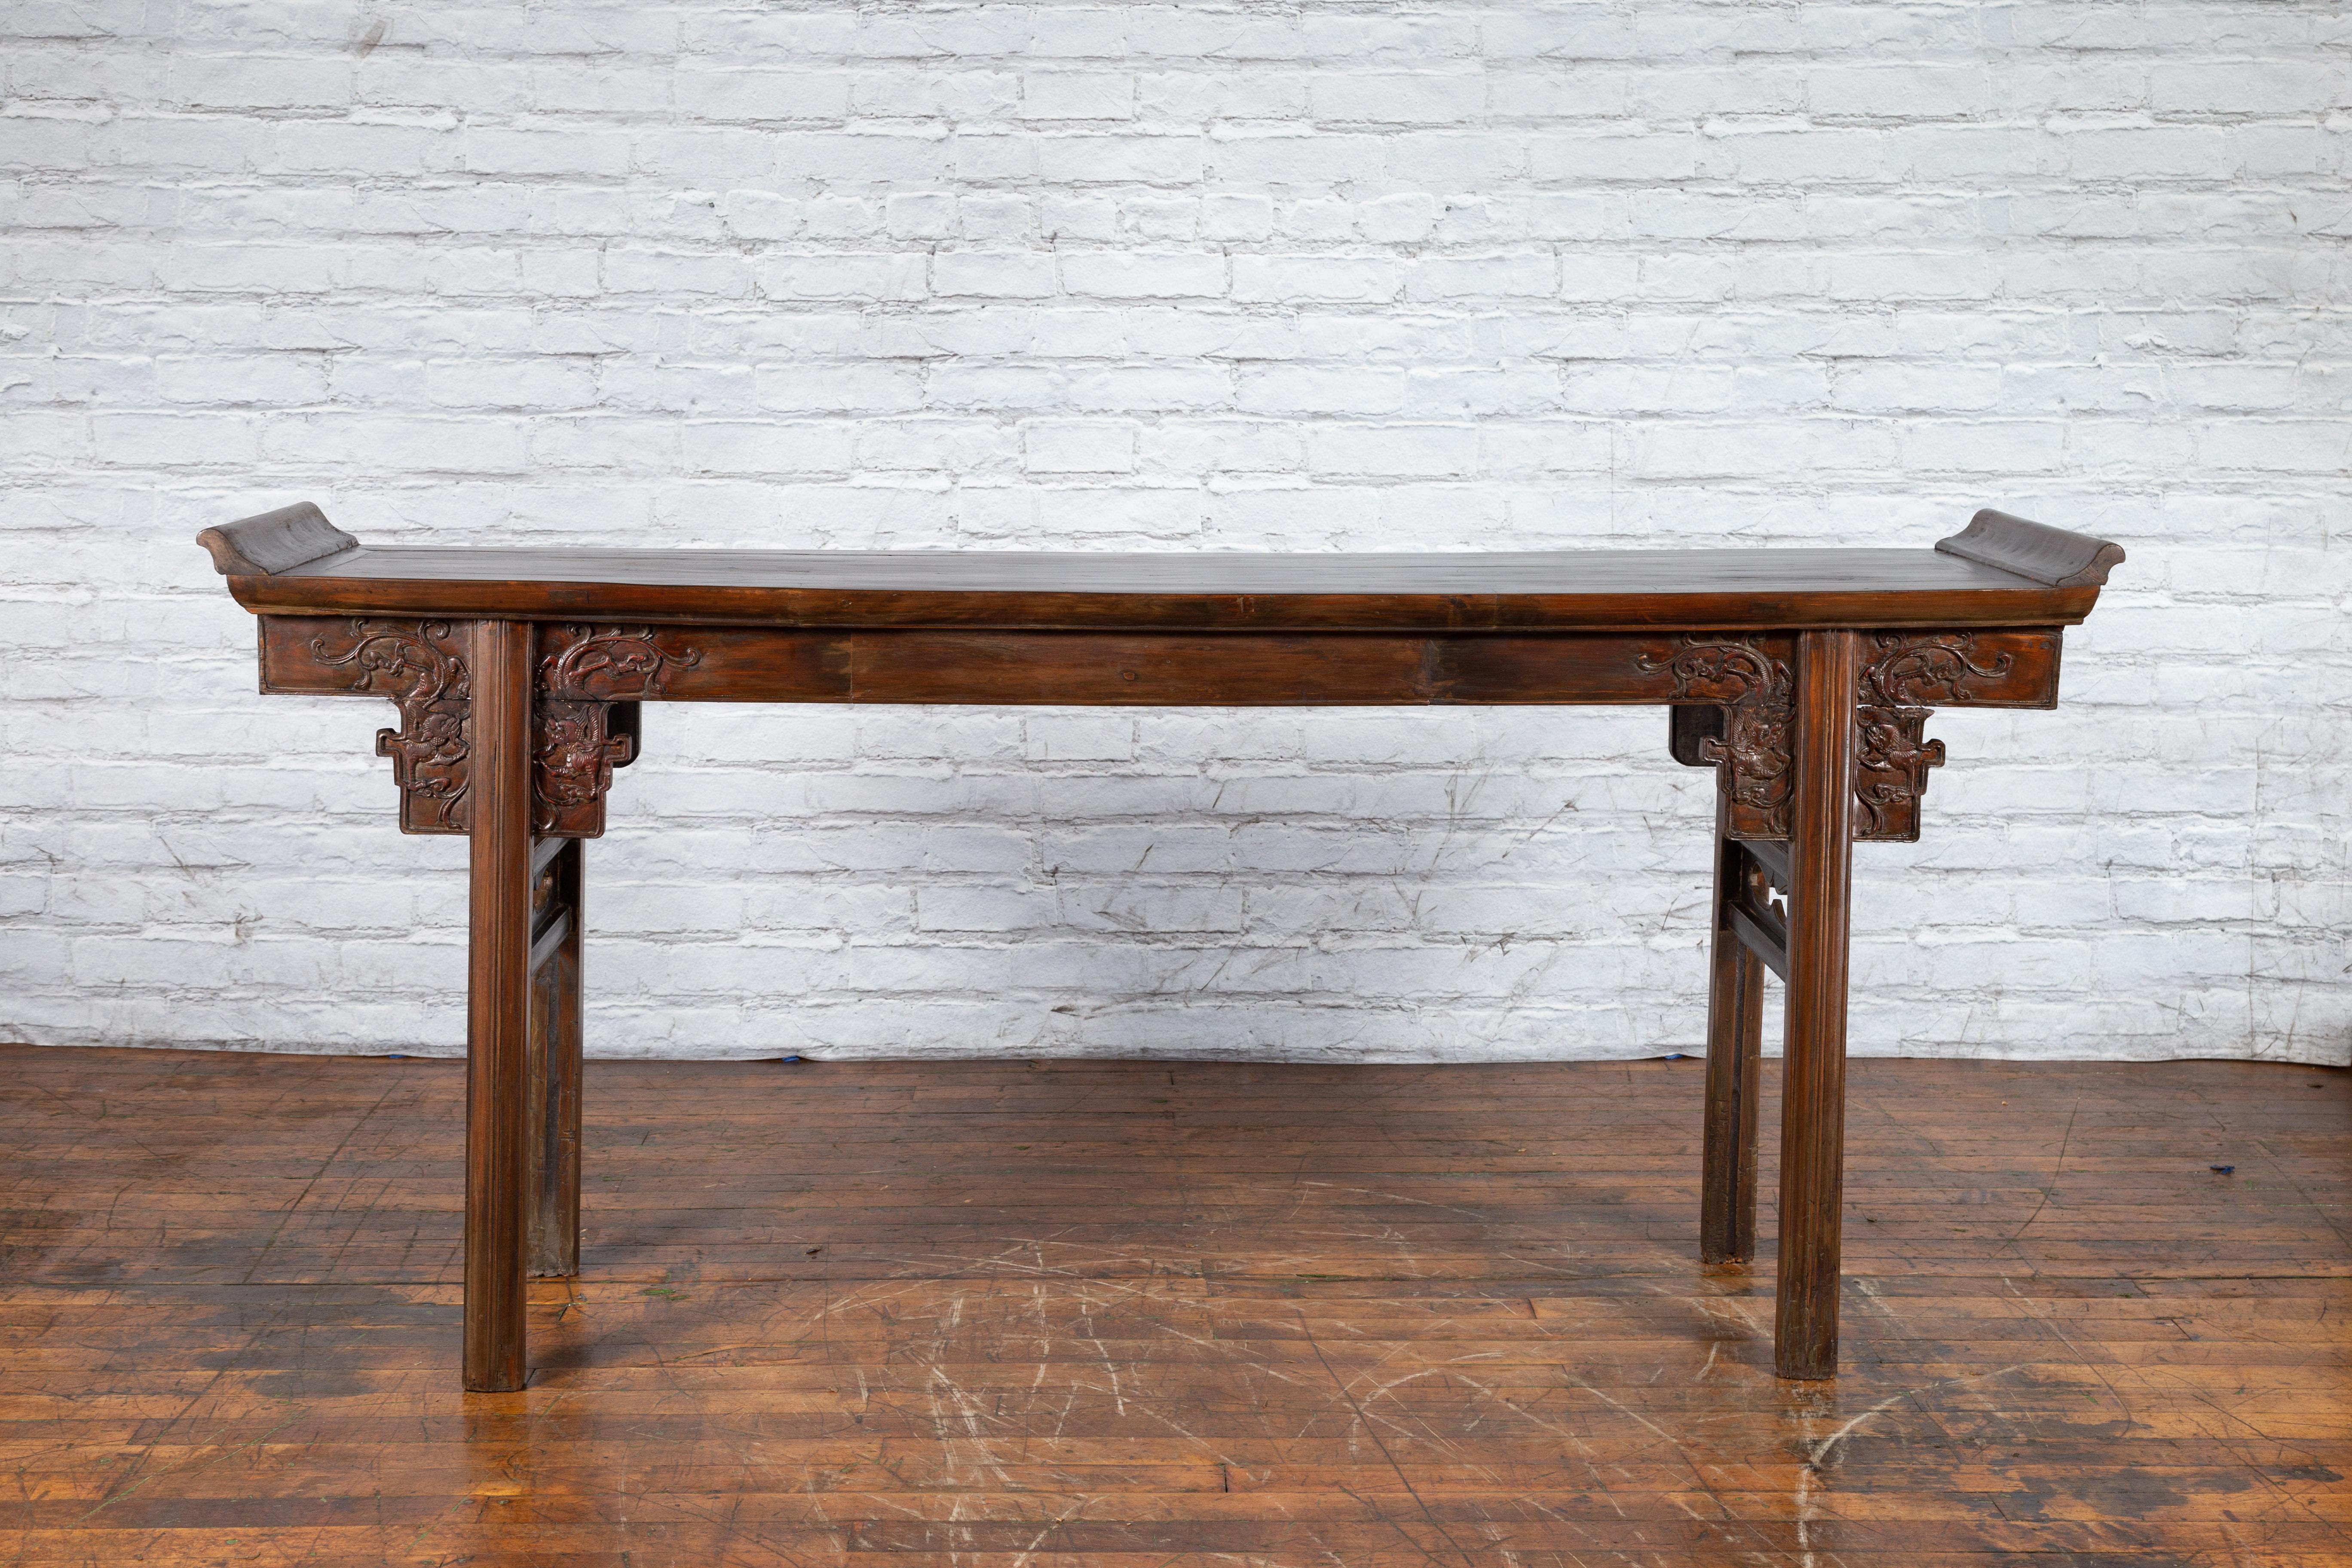 A large Chinese elmwood altar console table from the early 20th century, with carved dragons and everted flanges. Created in China during the early years of the 20th century, this altar console table features a long rectangular top flanked with